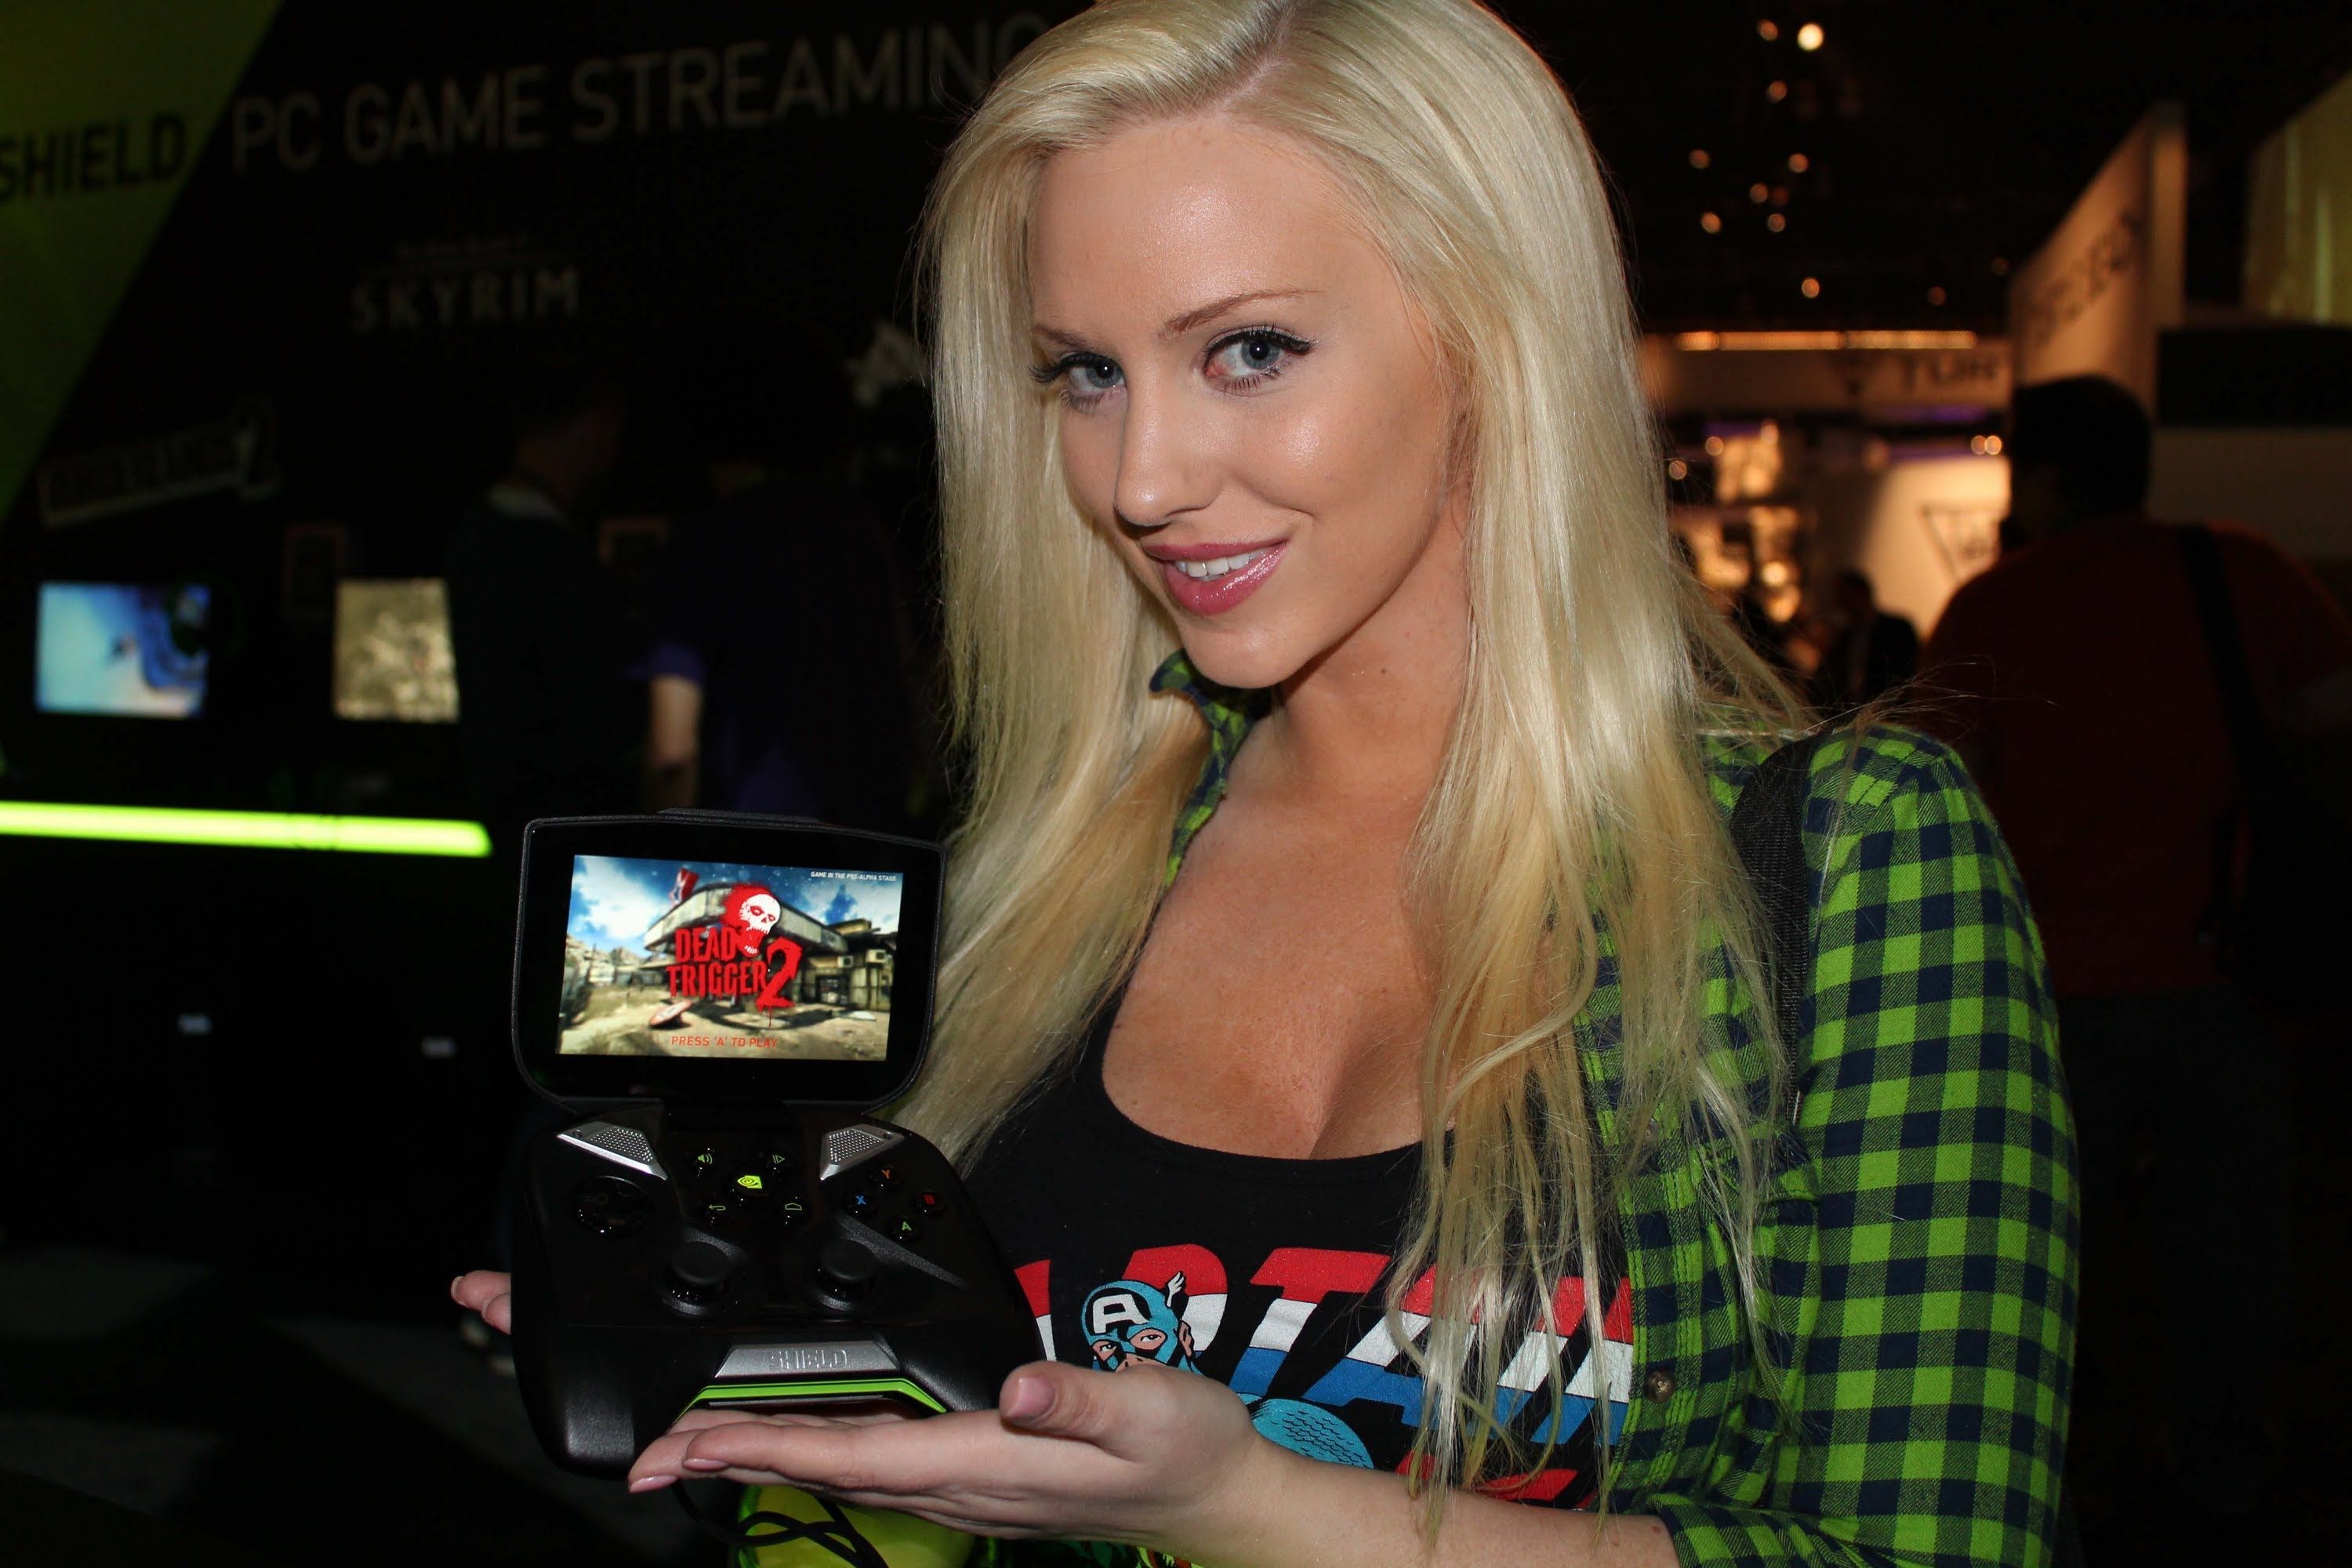 The 15 Hottest Streamers On Twitch